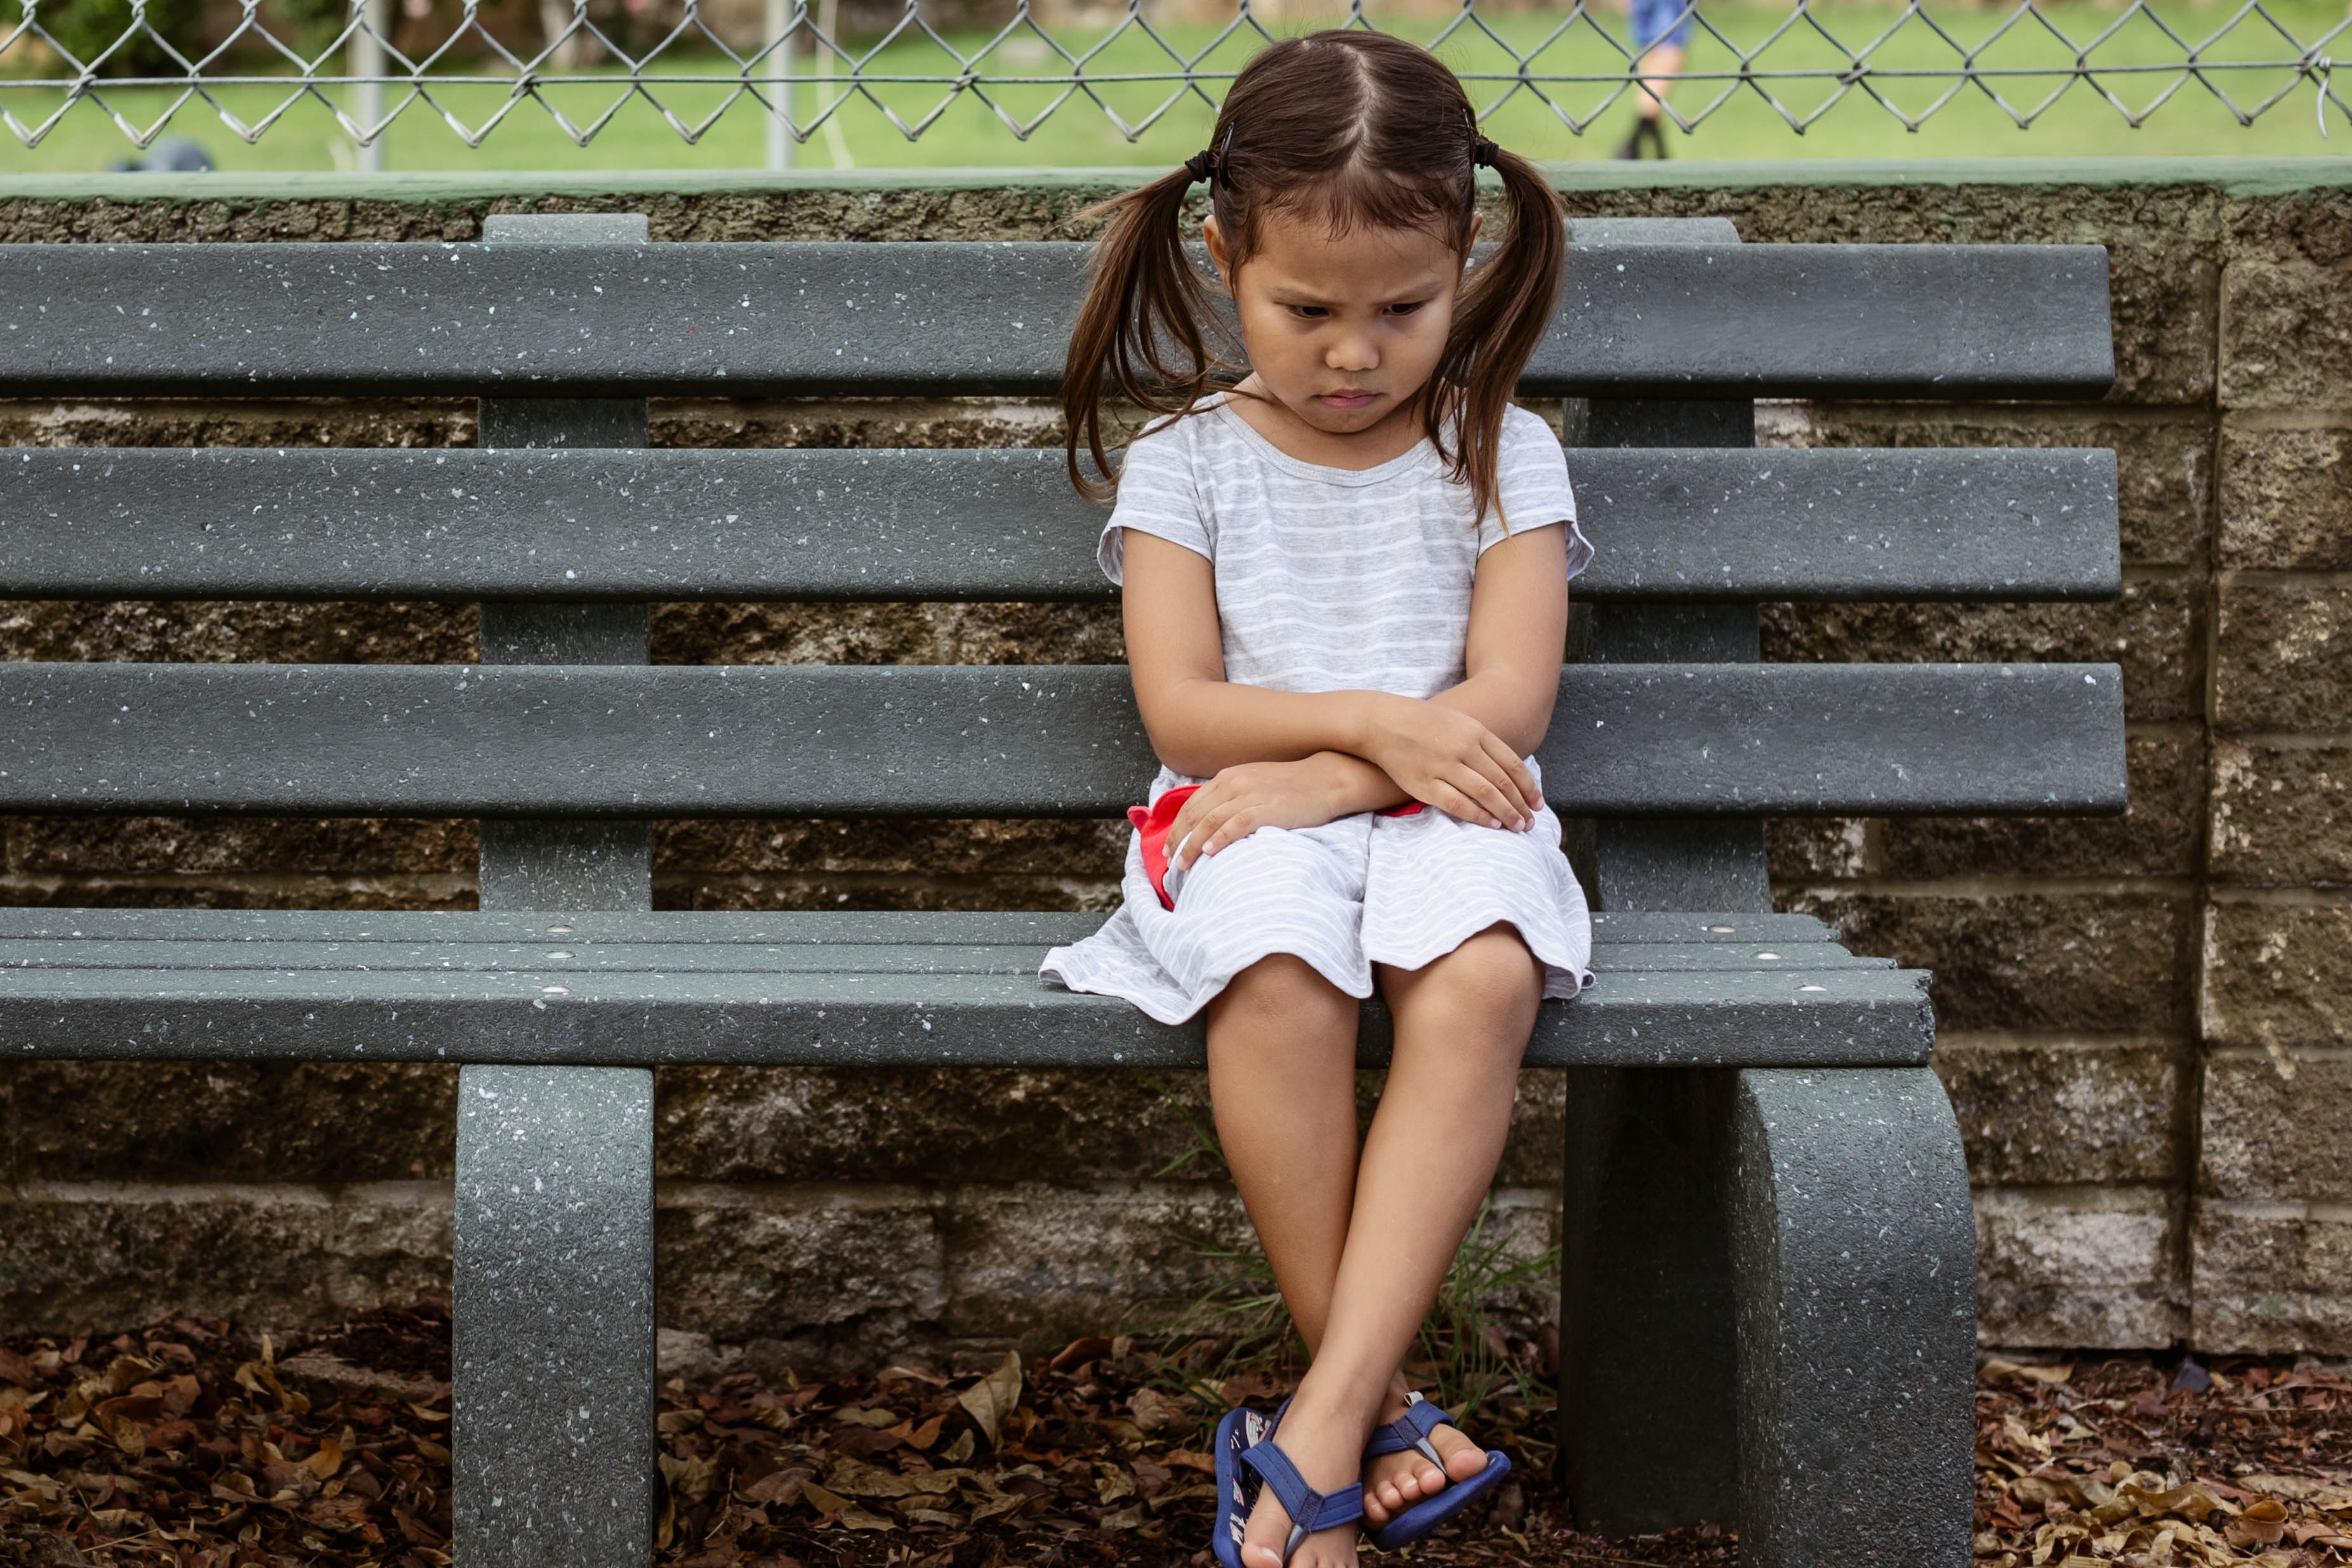 An unhappy little girl sitting alone on the bench | Source: Shutterstock